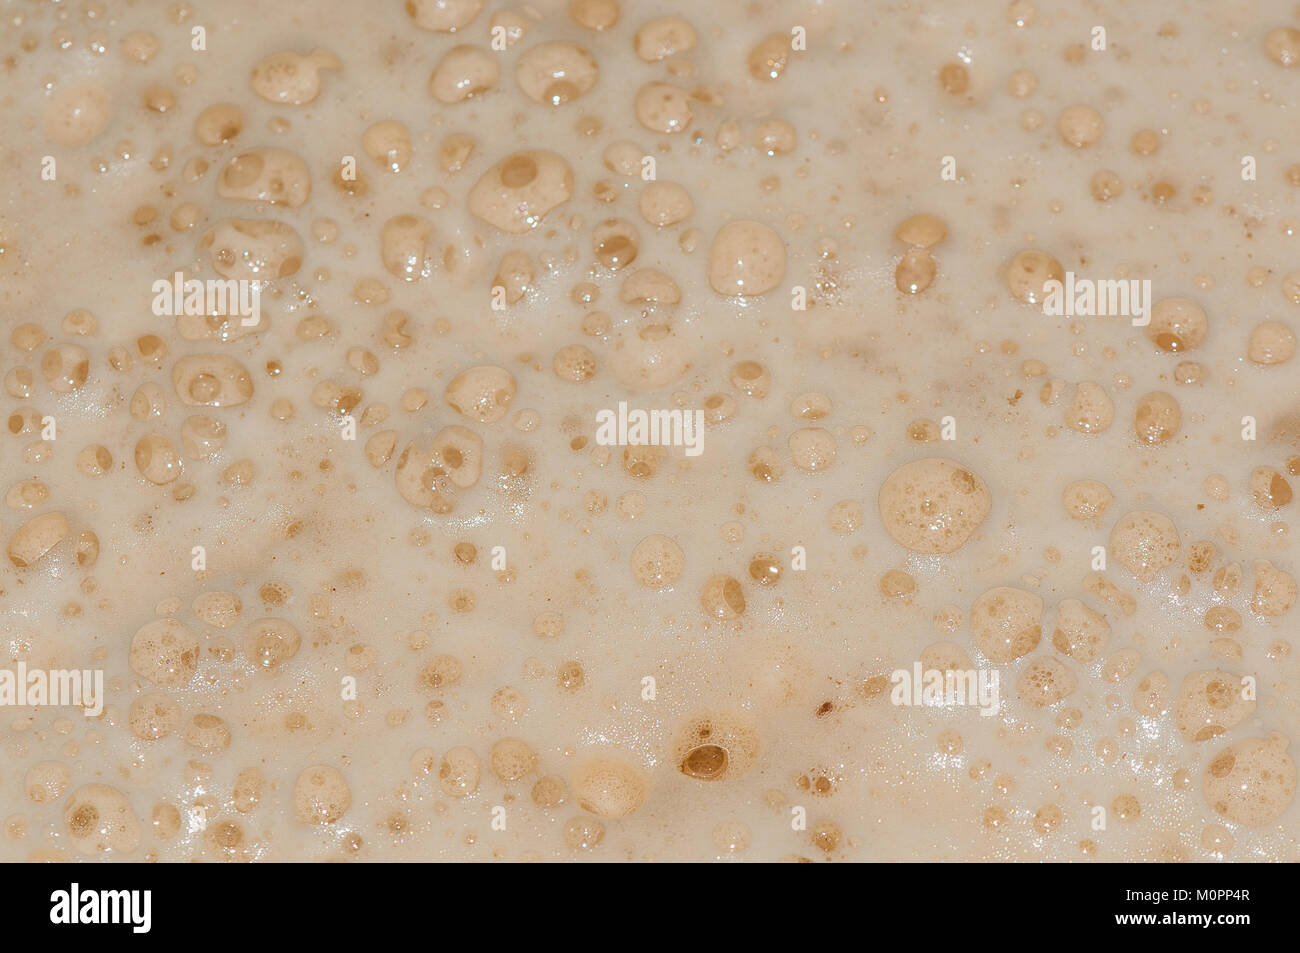 close-up view beer foam with bubbles Stock Photo